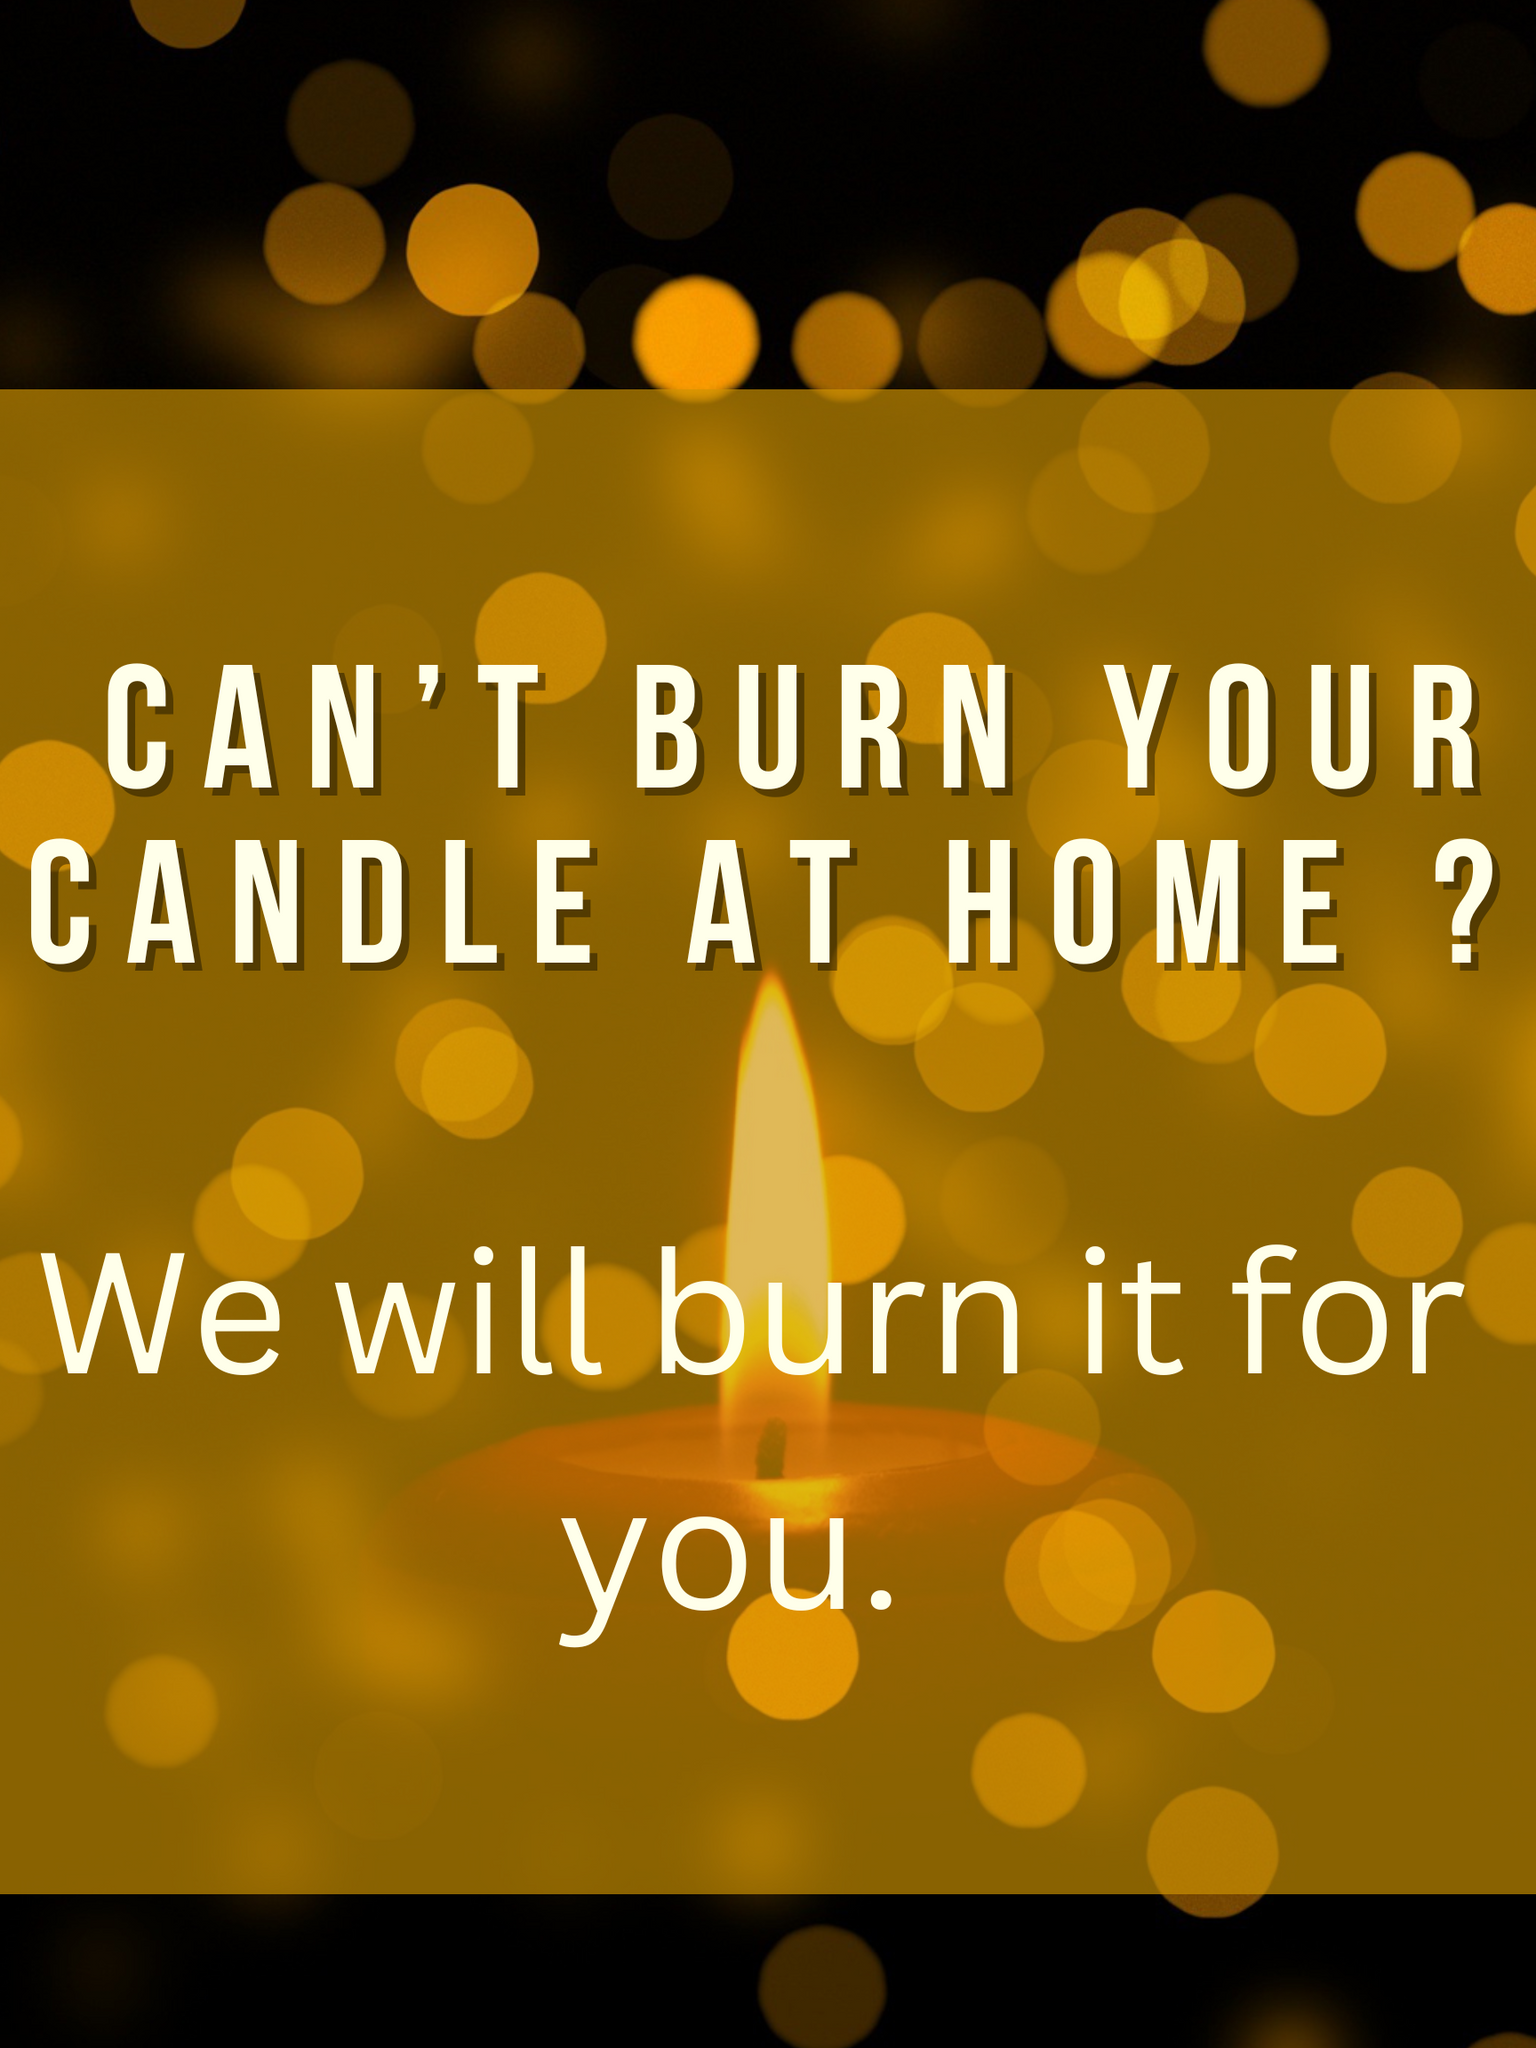 Candle burning (we will burn it for you)